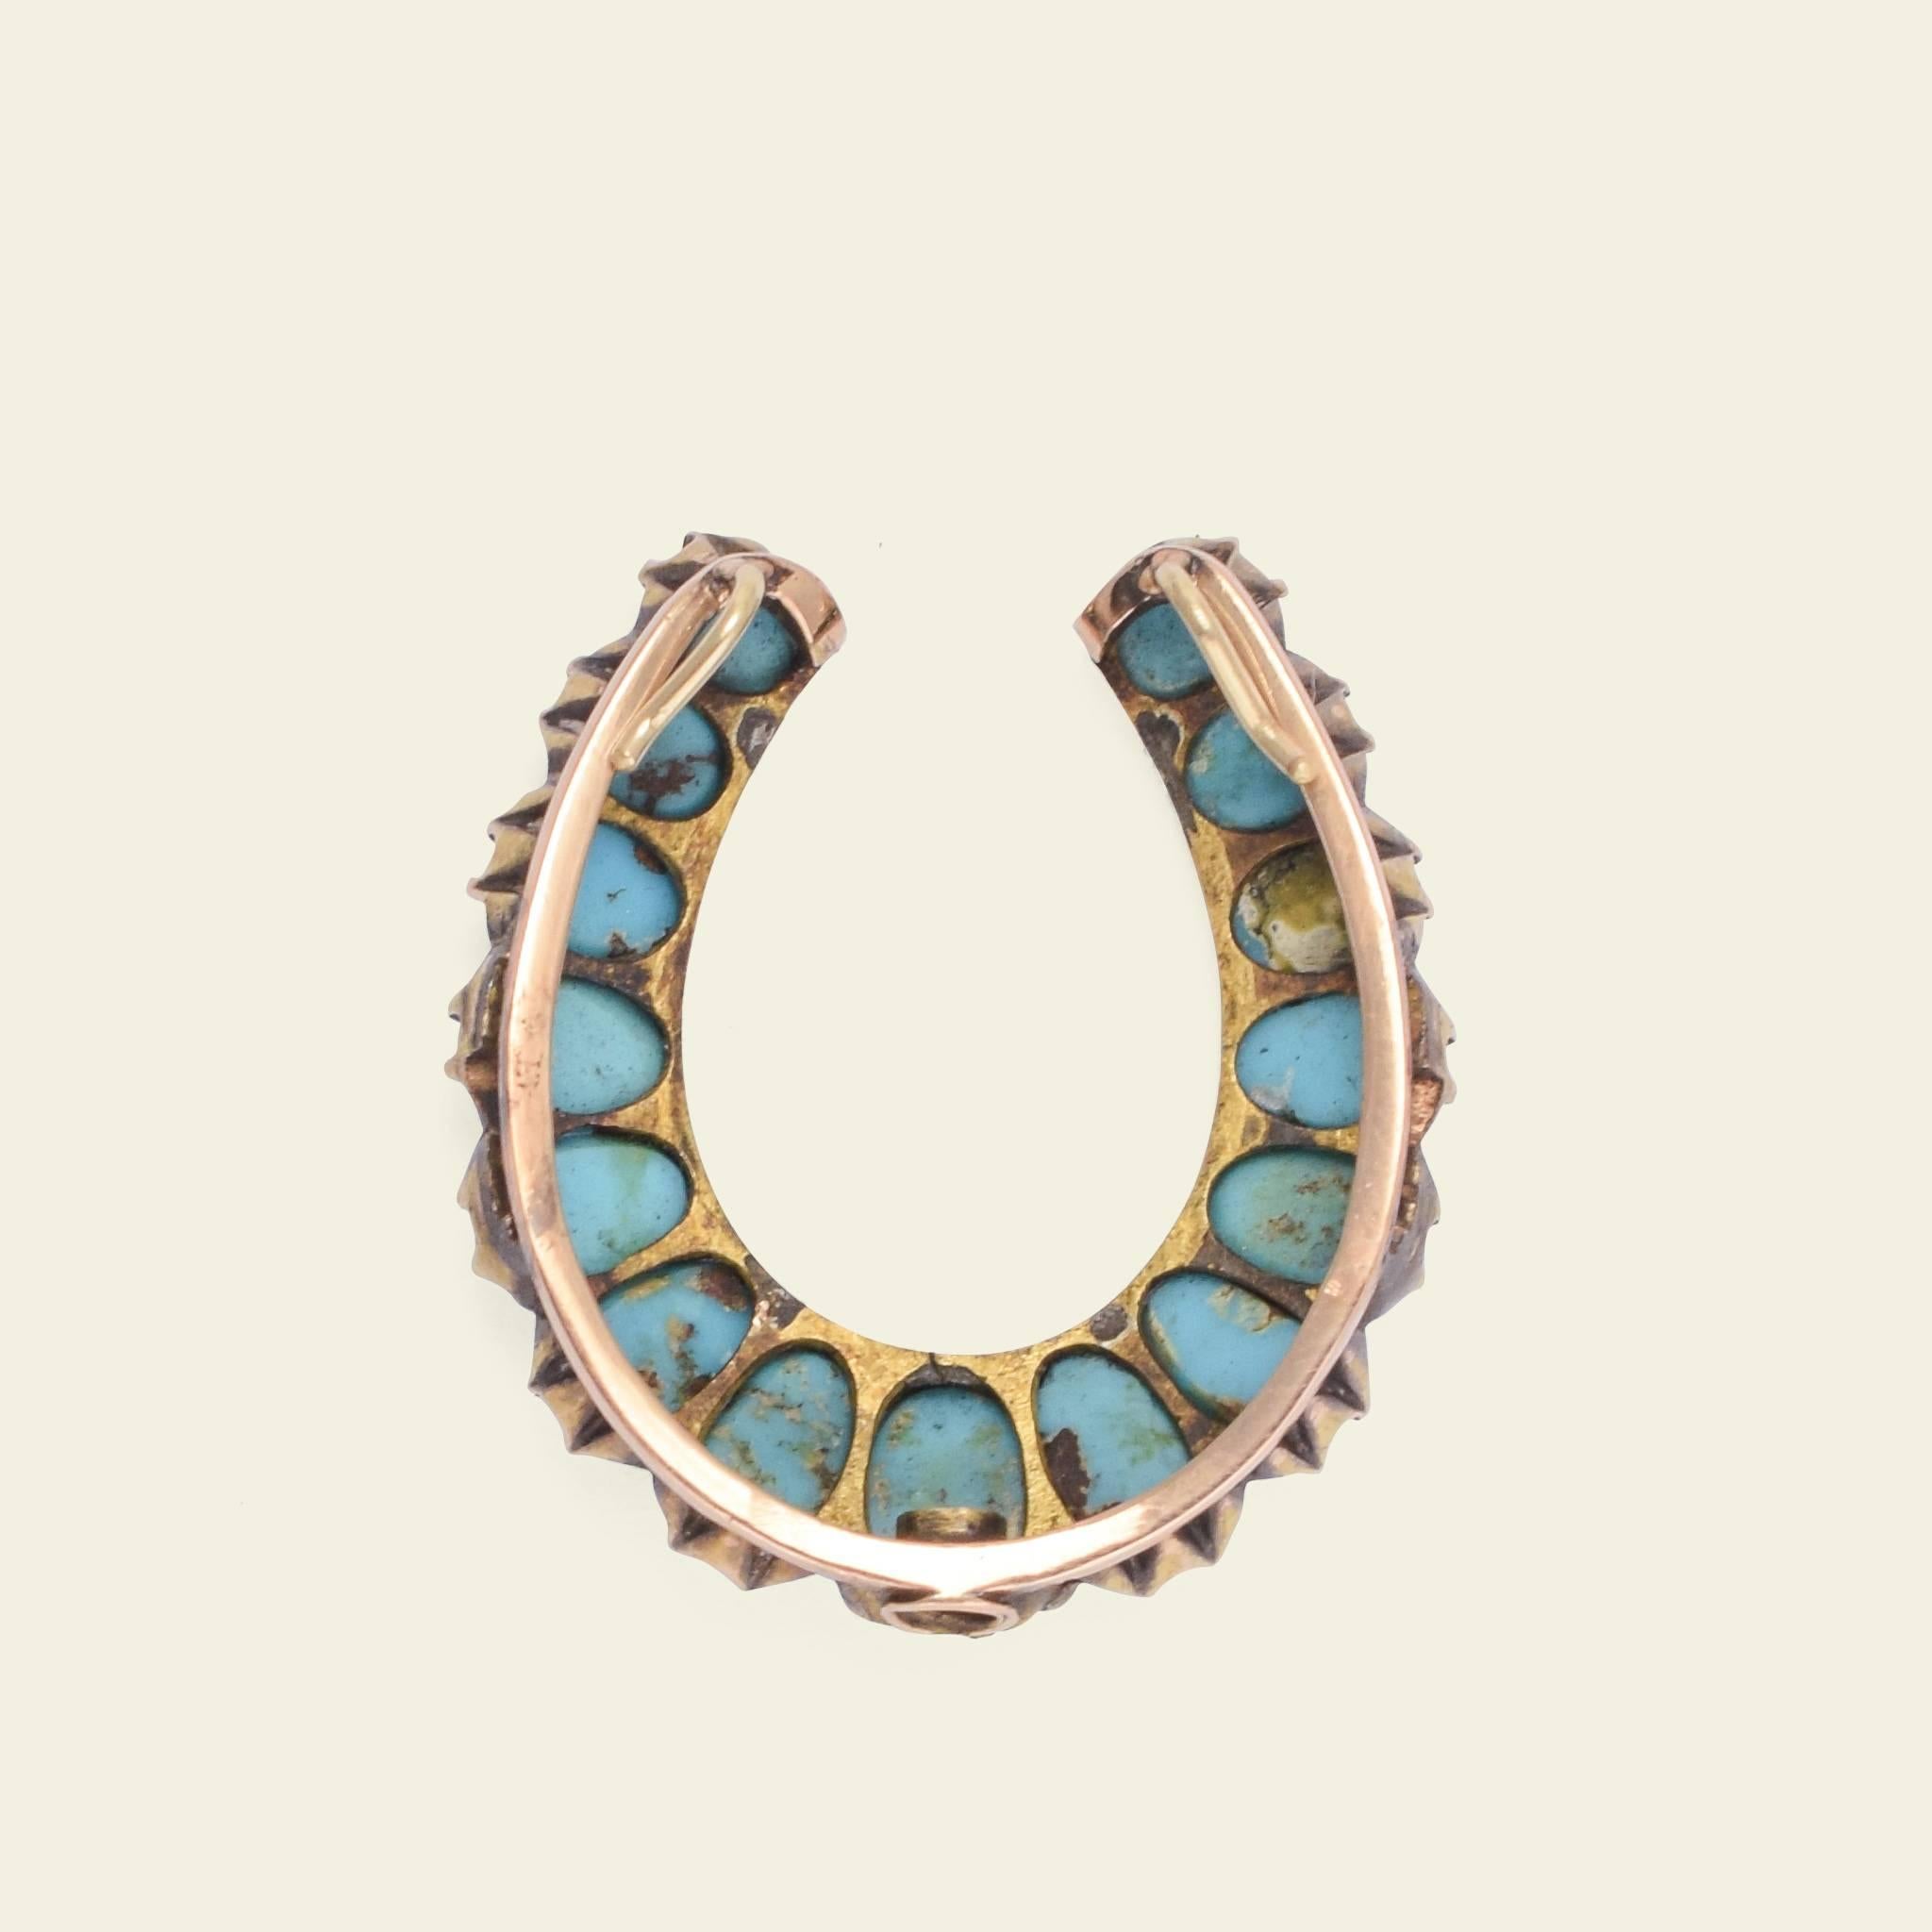 Women's or Men's Victorian Convertible Turquoise Horseshoe Brooch and Pendant